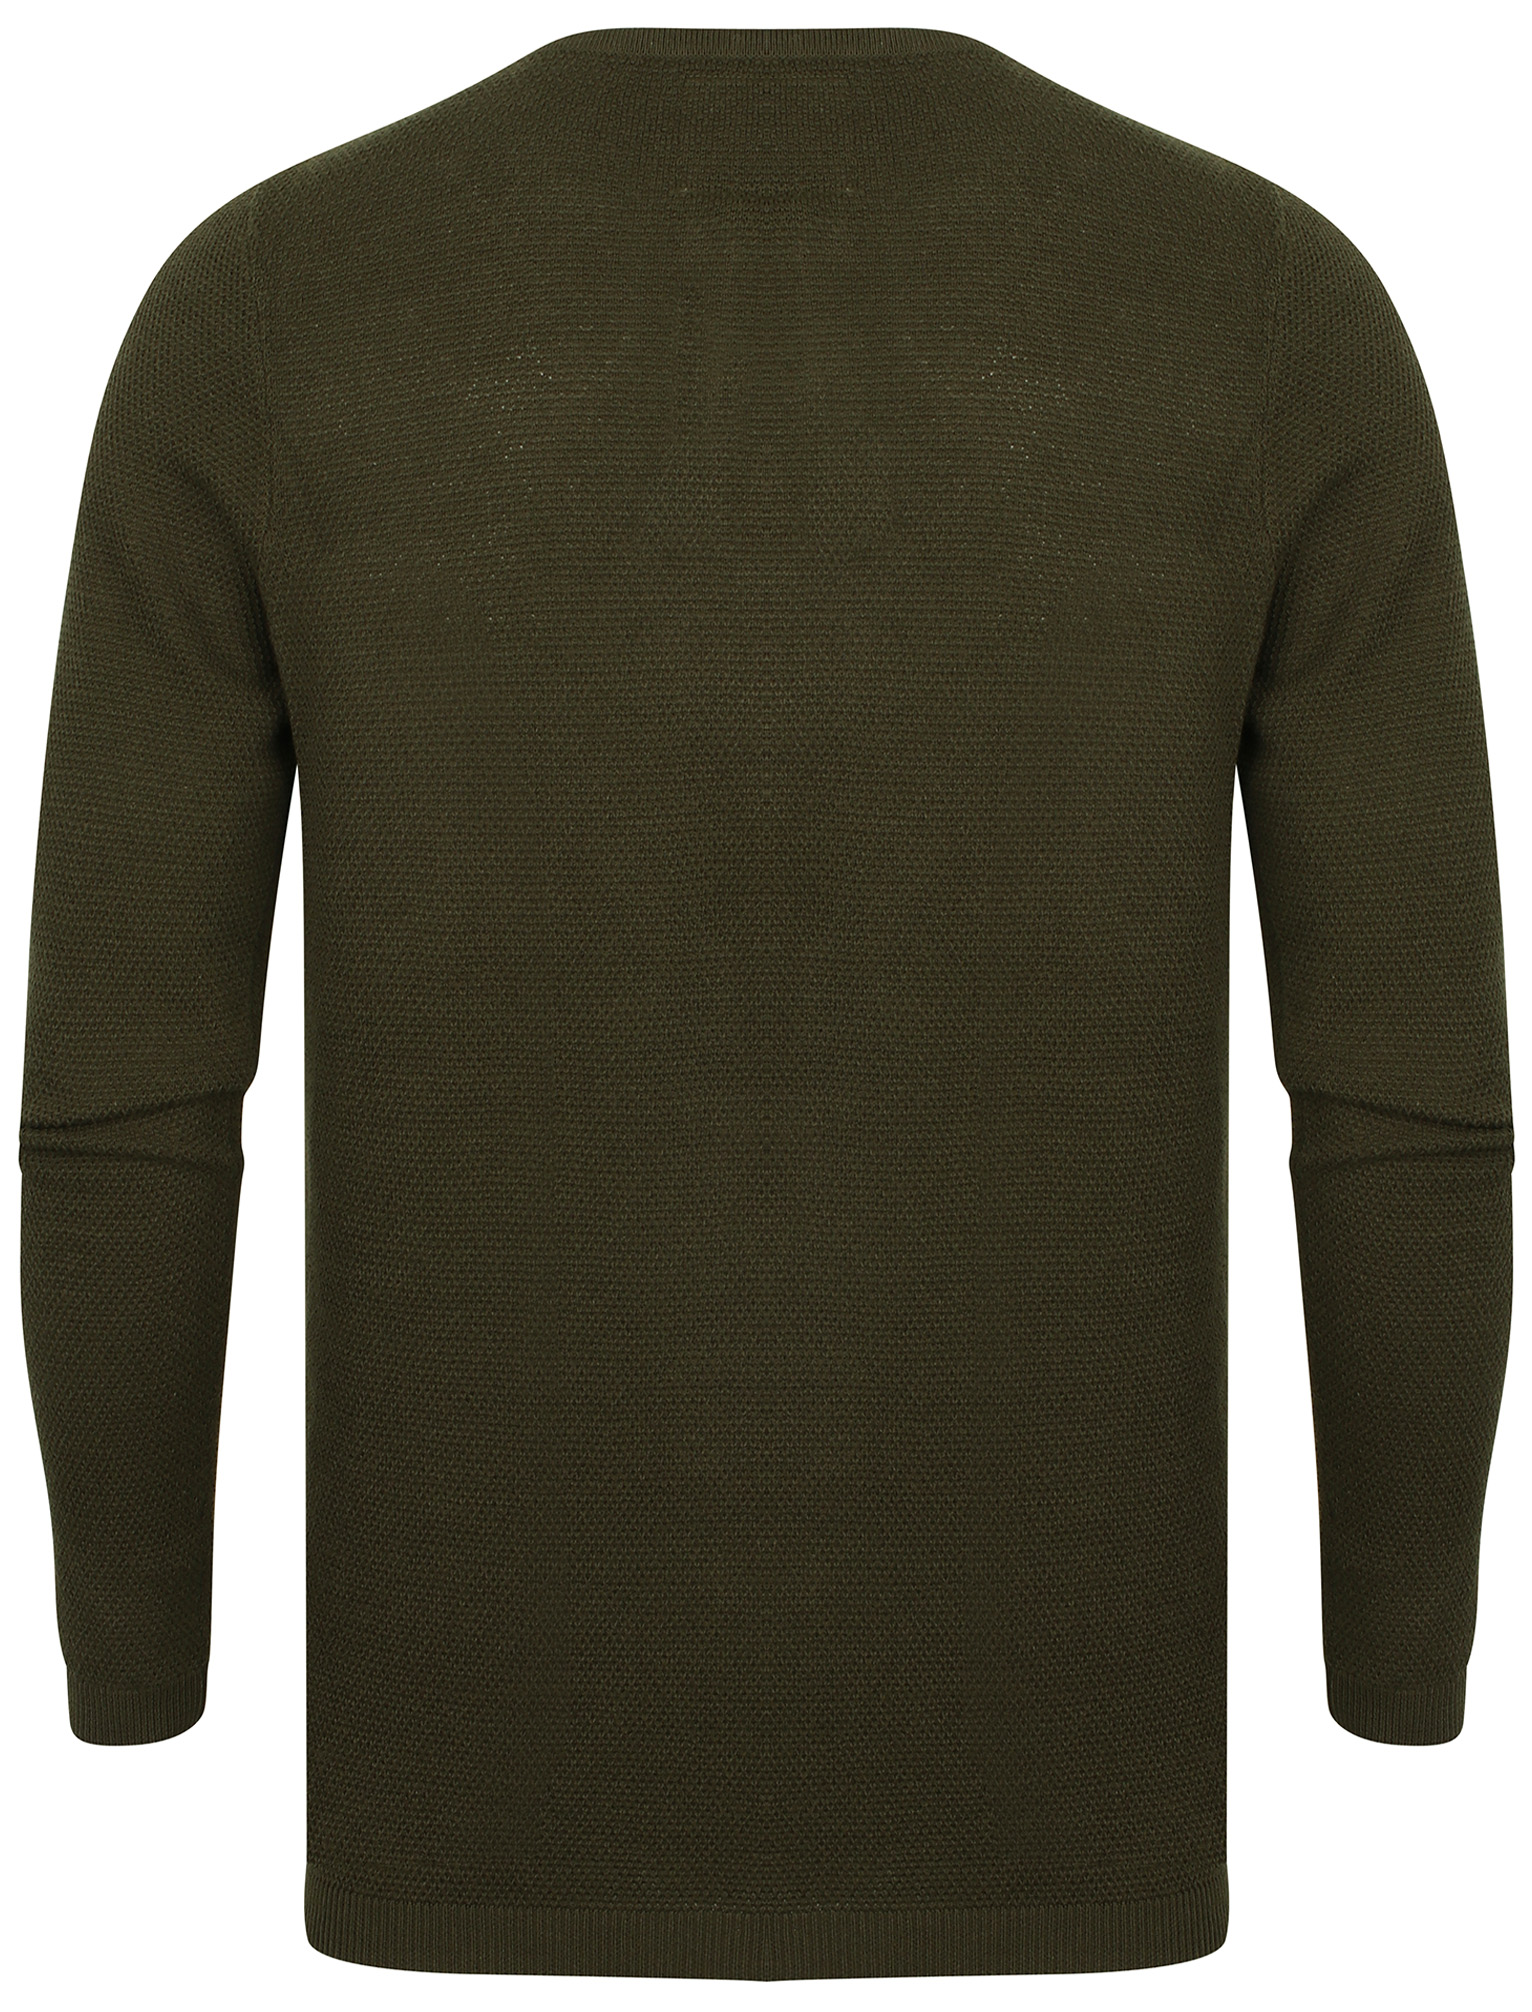 Mens Dissident Deluca Henley Textured Knitted Long Sleeve Jumper Top Size S-XXL